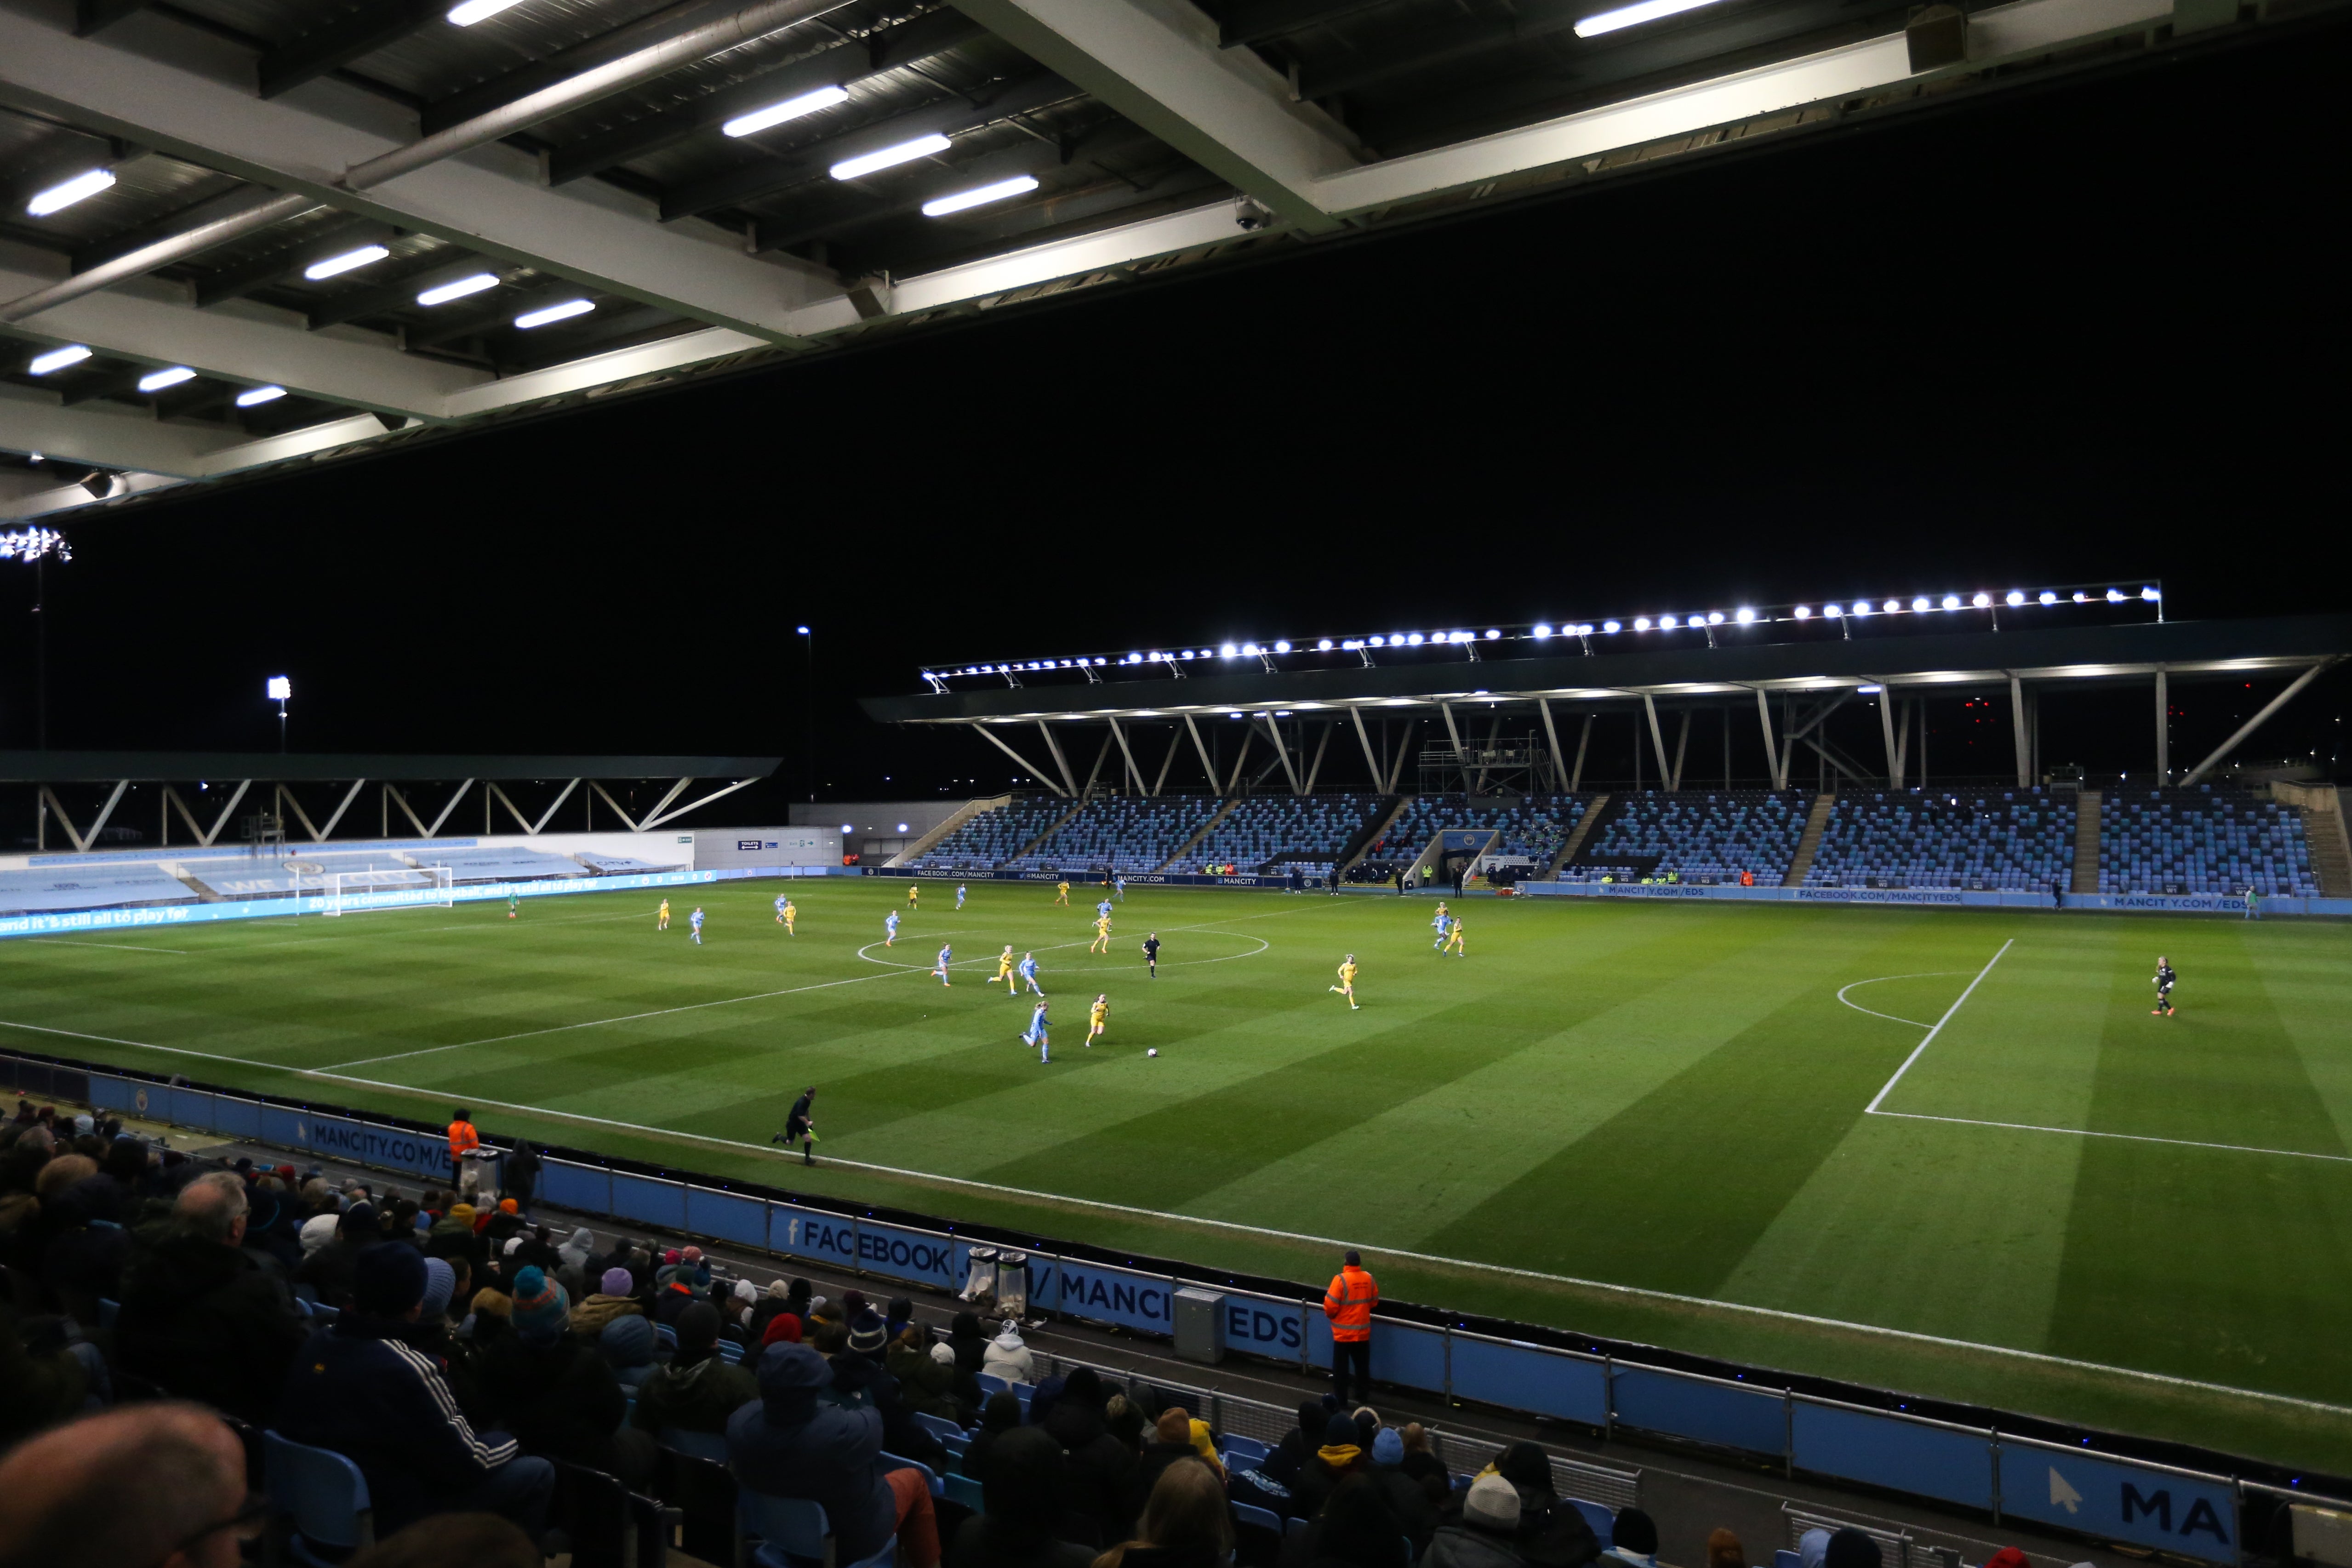 Manchester City Academy Stadium will stage three matches at the European Championship